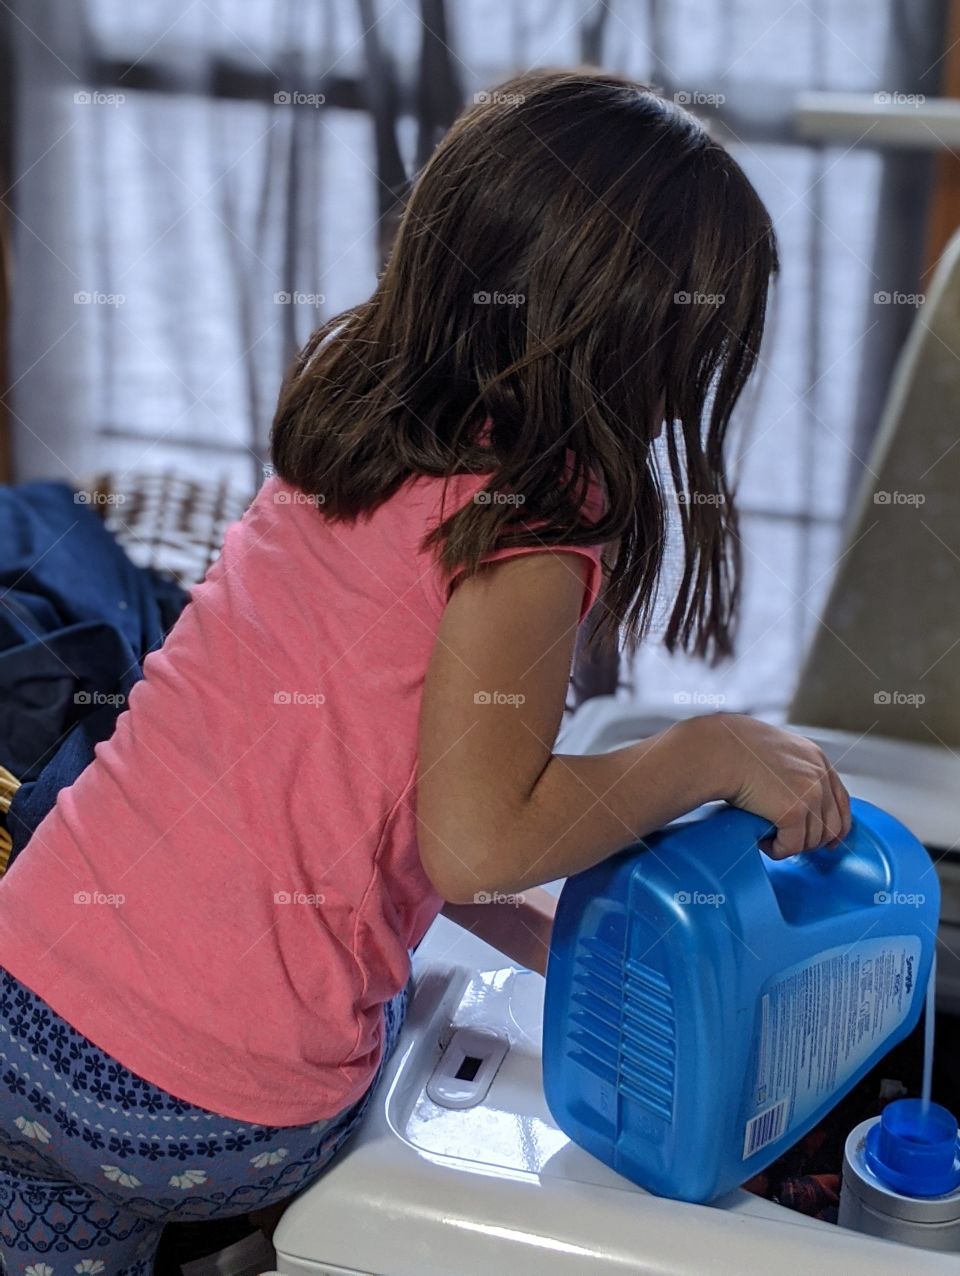 child doing the laundry as a chore